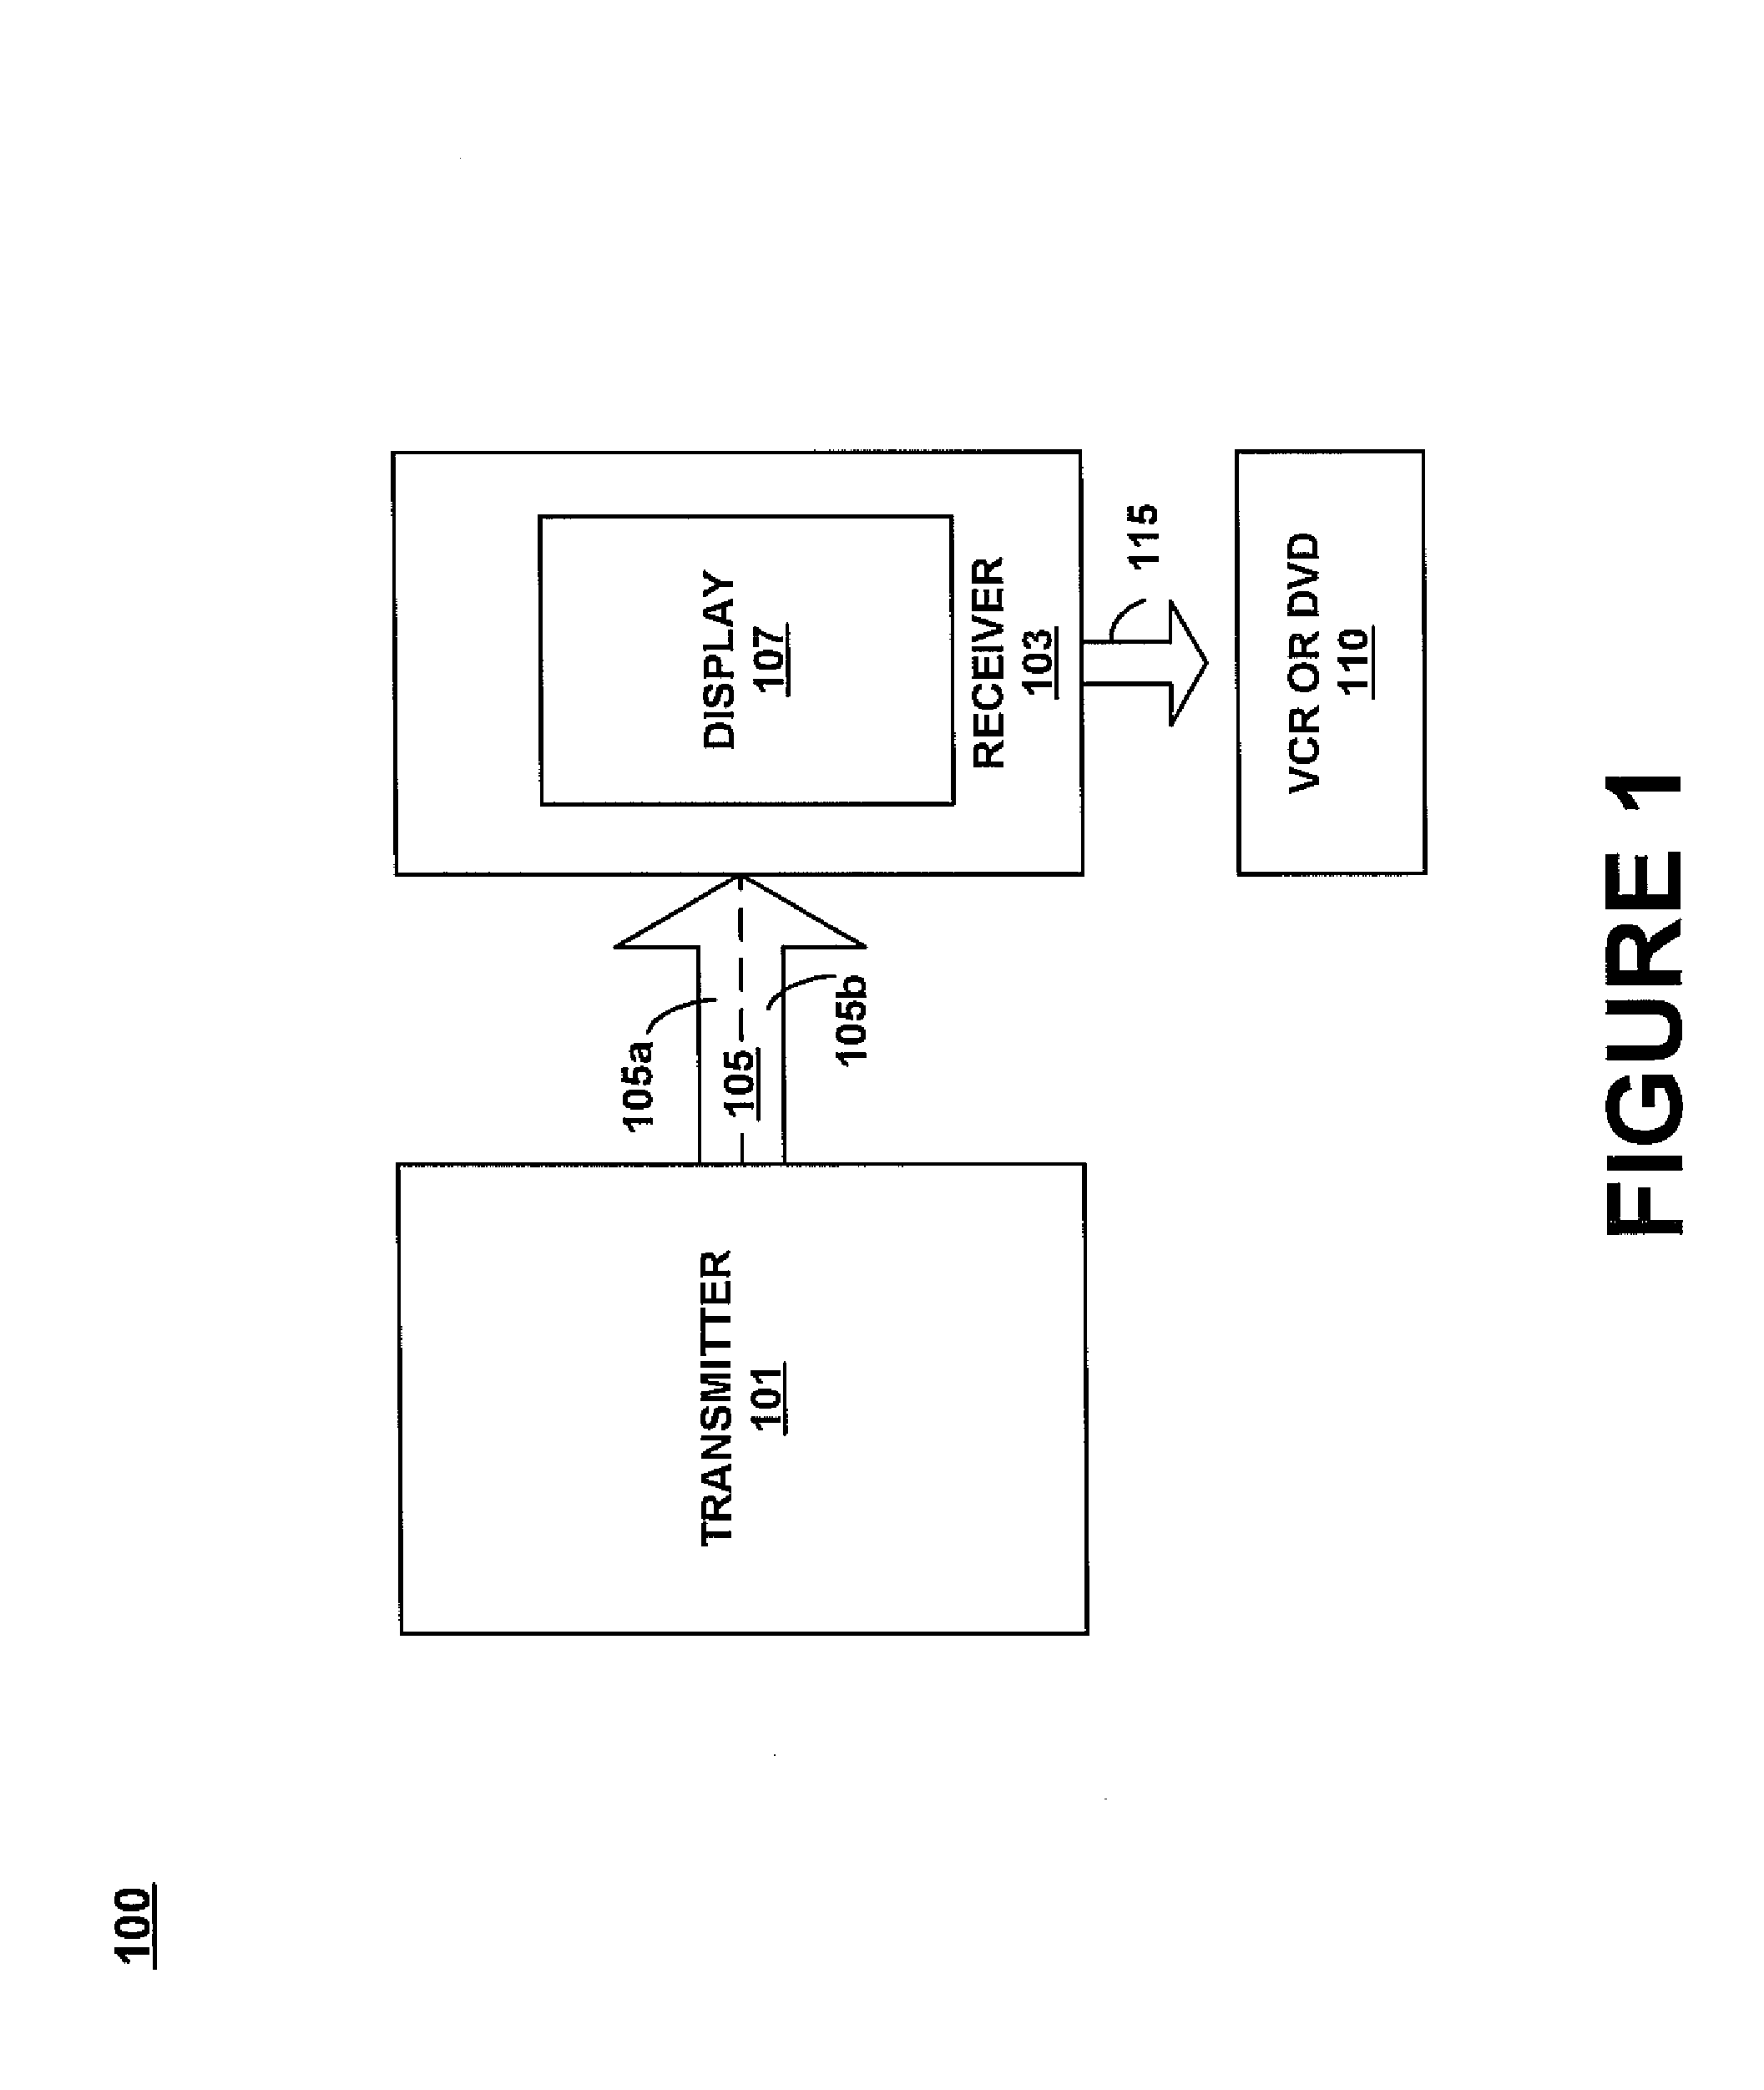 Method and system for preventing the unauthorized copying of video content